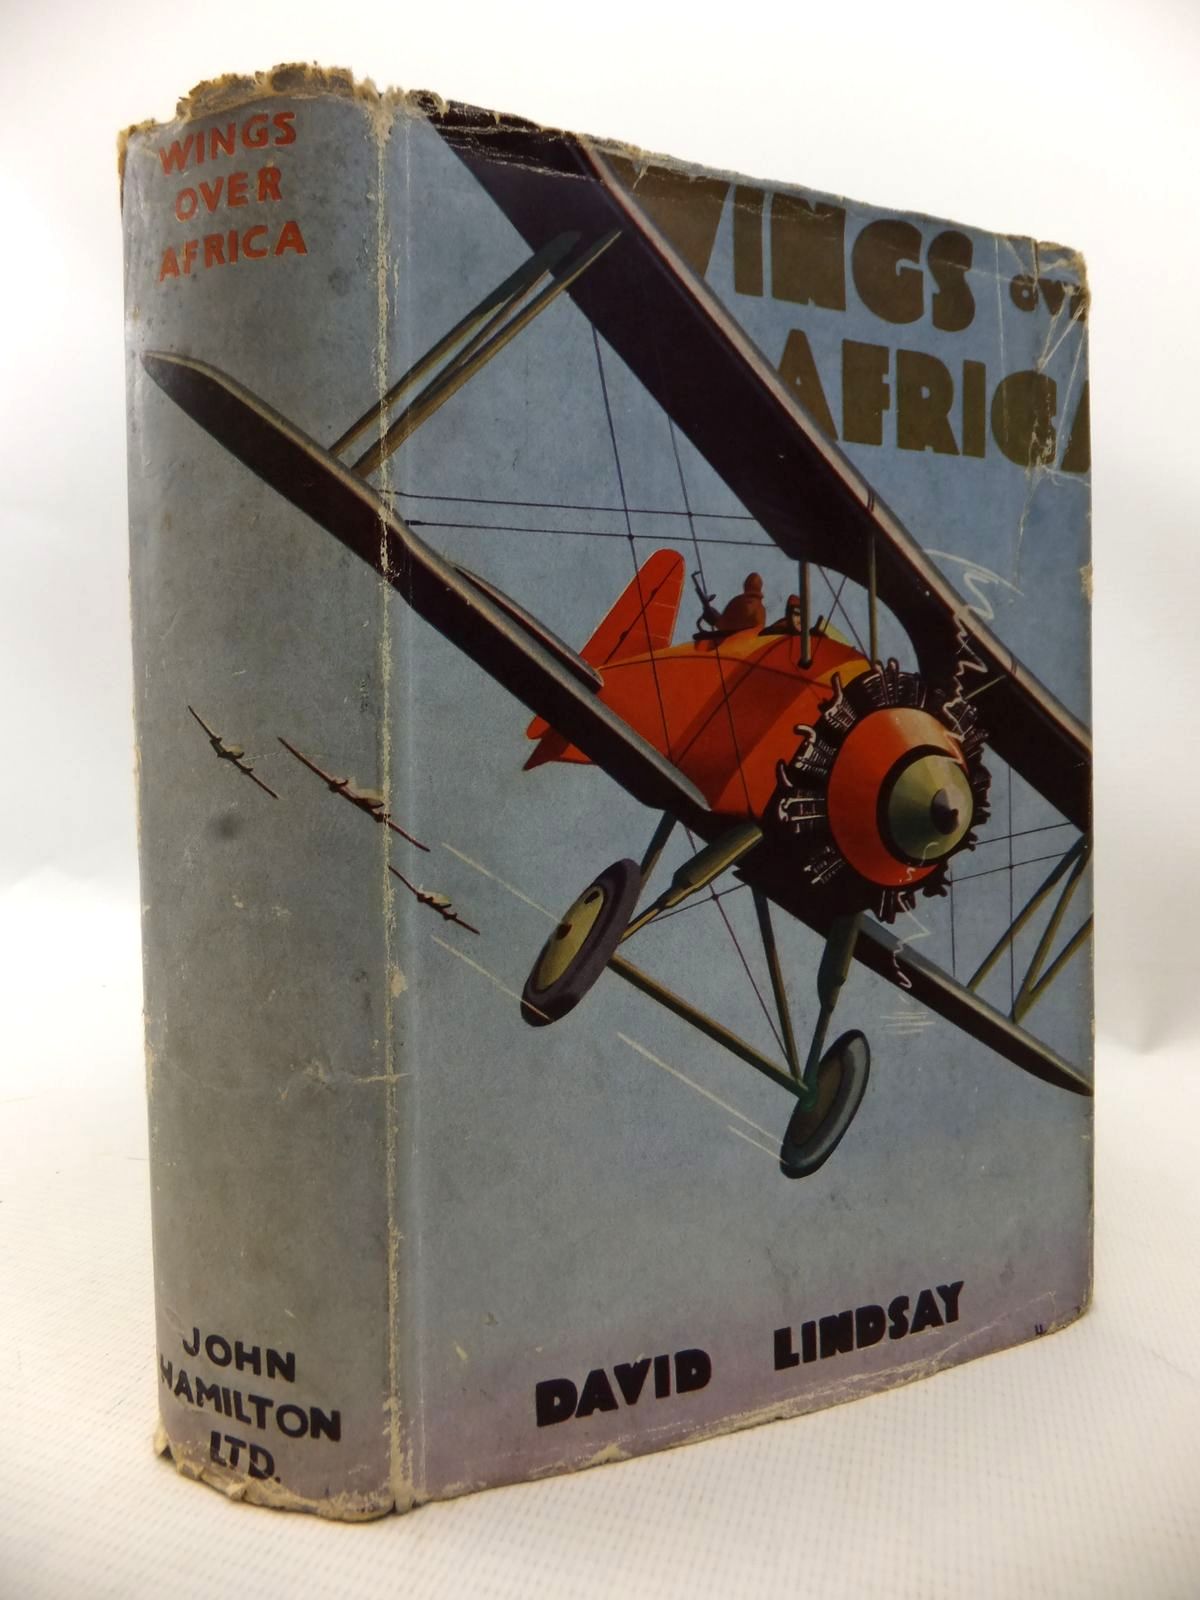 Photo of WINGS OVER AFRICA written by Lindsay, David published by John Hamilton Ltd. (STOCK CODE: 1813851)  for sale by Stella & Rose's Books